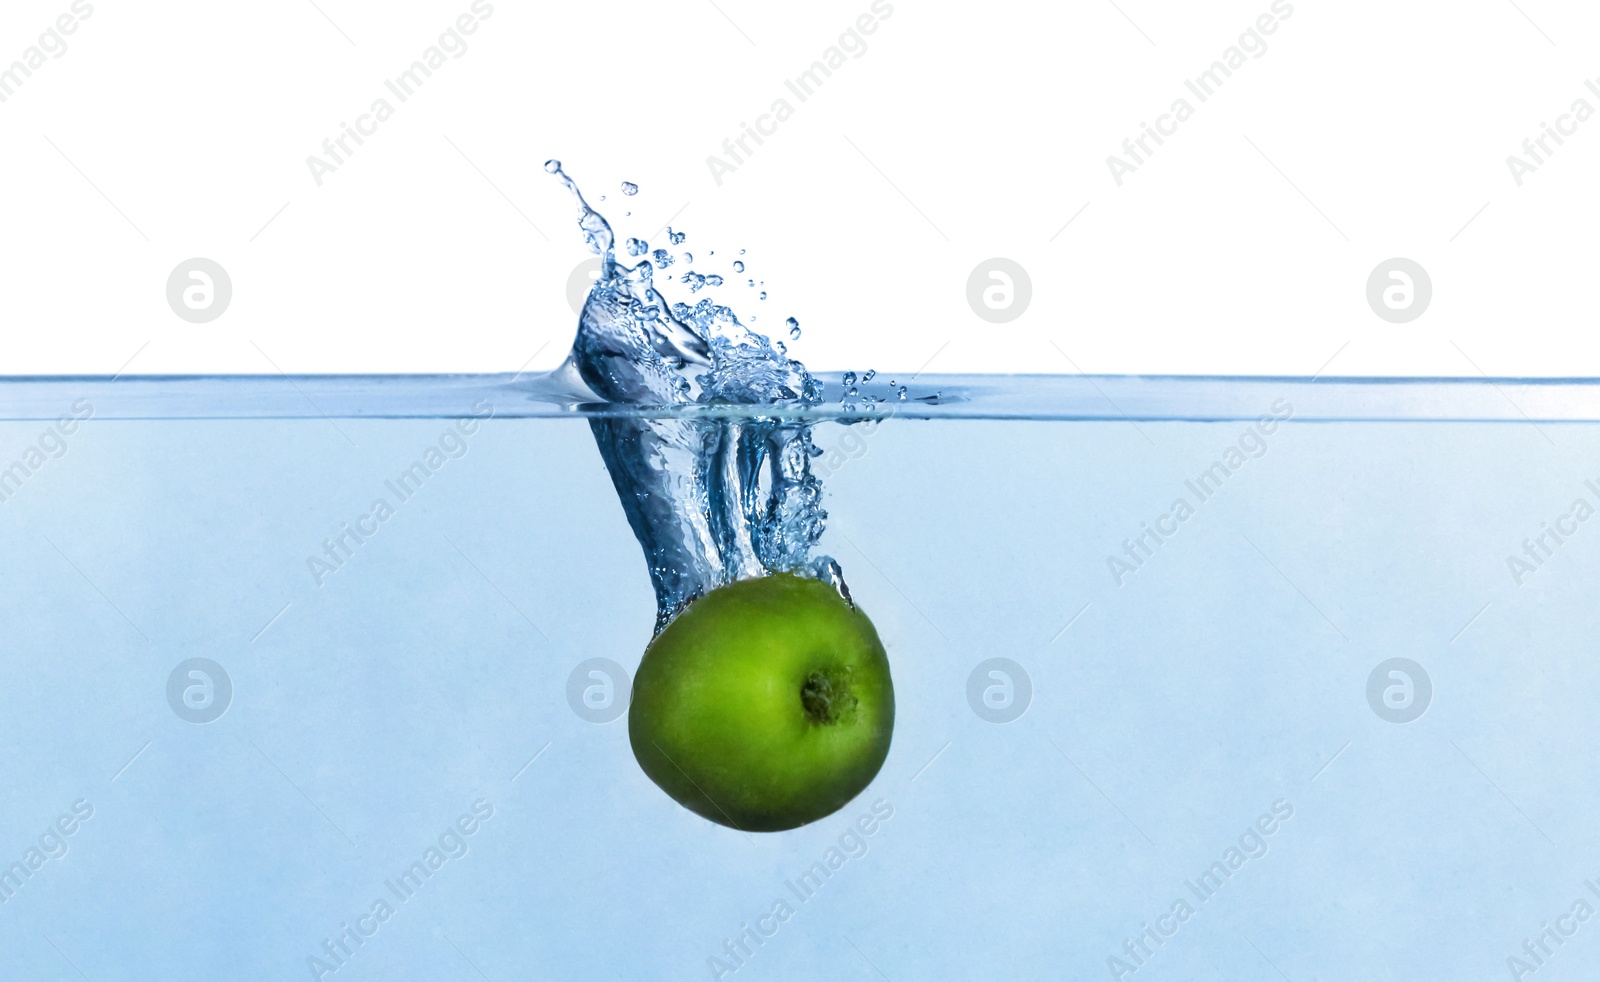 Photo of Apple falling down into clear water against white background